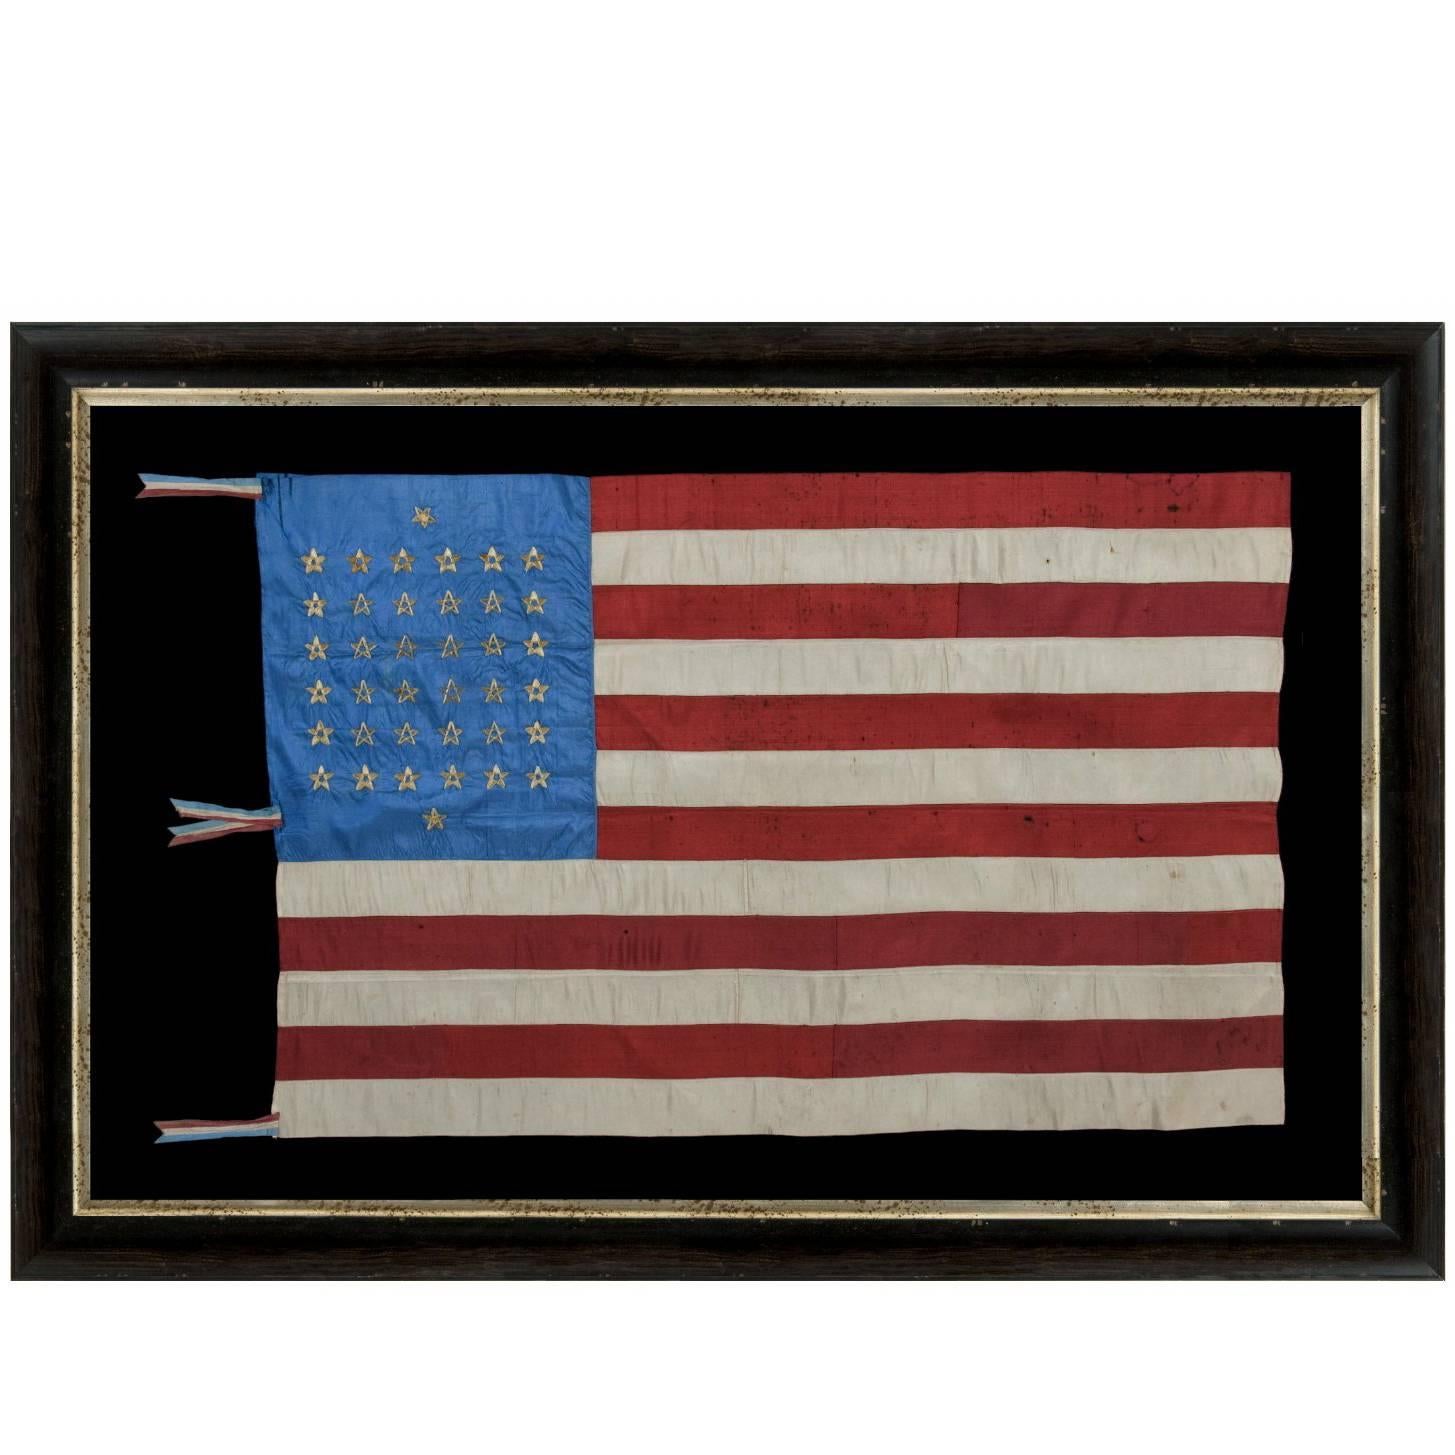 38 Star, Silk Flag with 12 Stripes and Three Different Styles of Stars